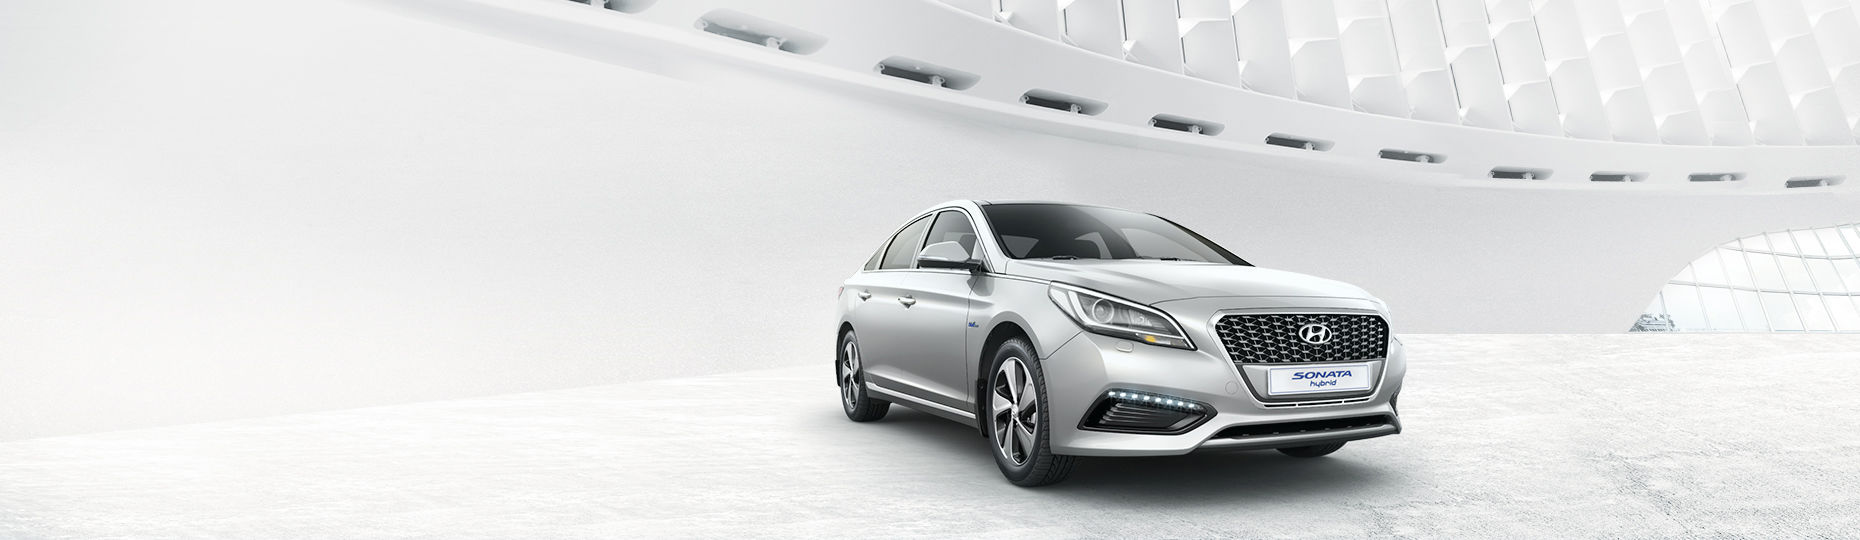 Silver color Sonata Hybrid is placed inside of a building with unique design